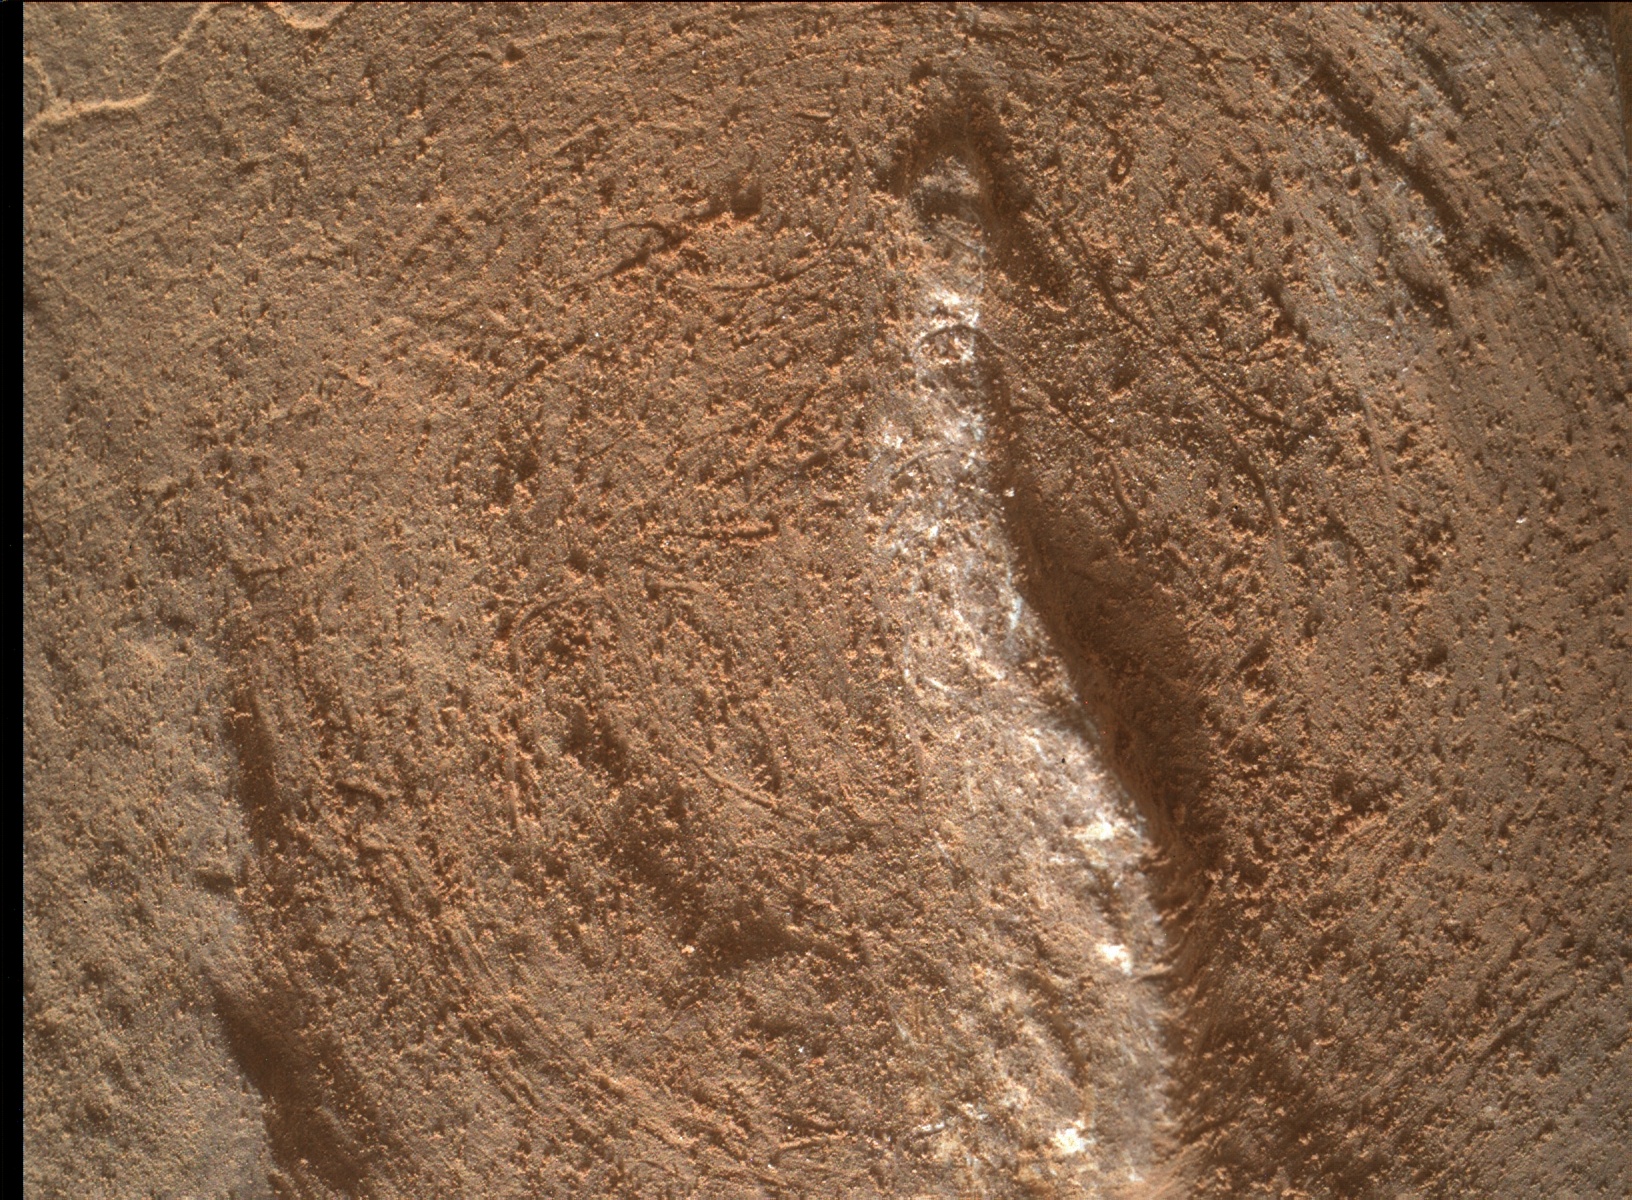 Nasa's Mars rover Curiosity acquired this image using its Mars Hand Lens Imager (MAHLI) on Sol 2048